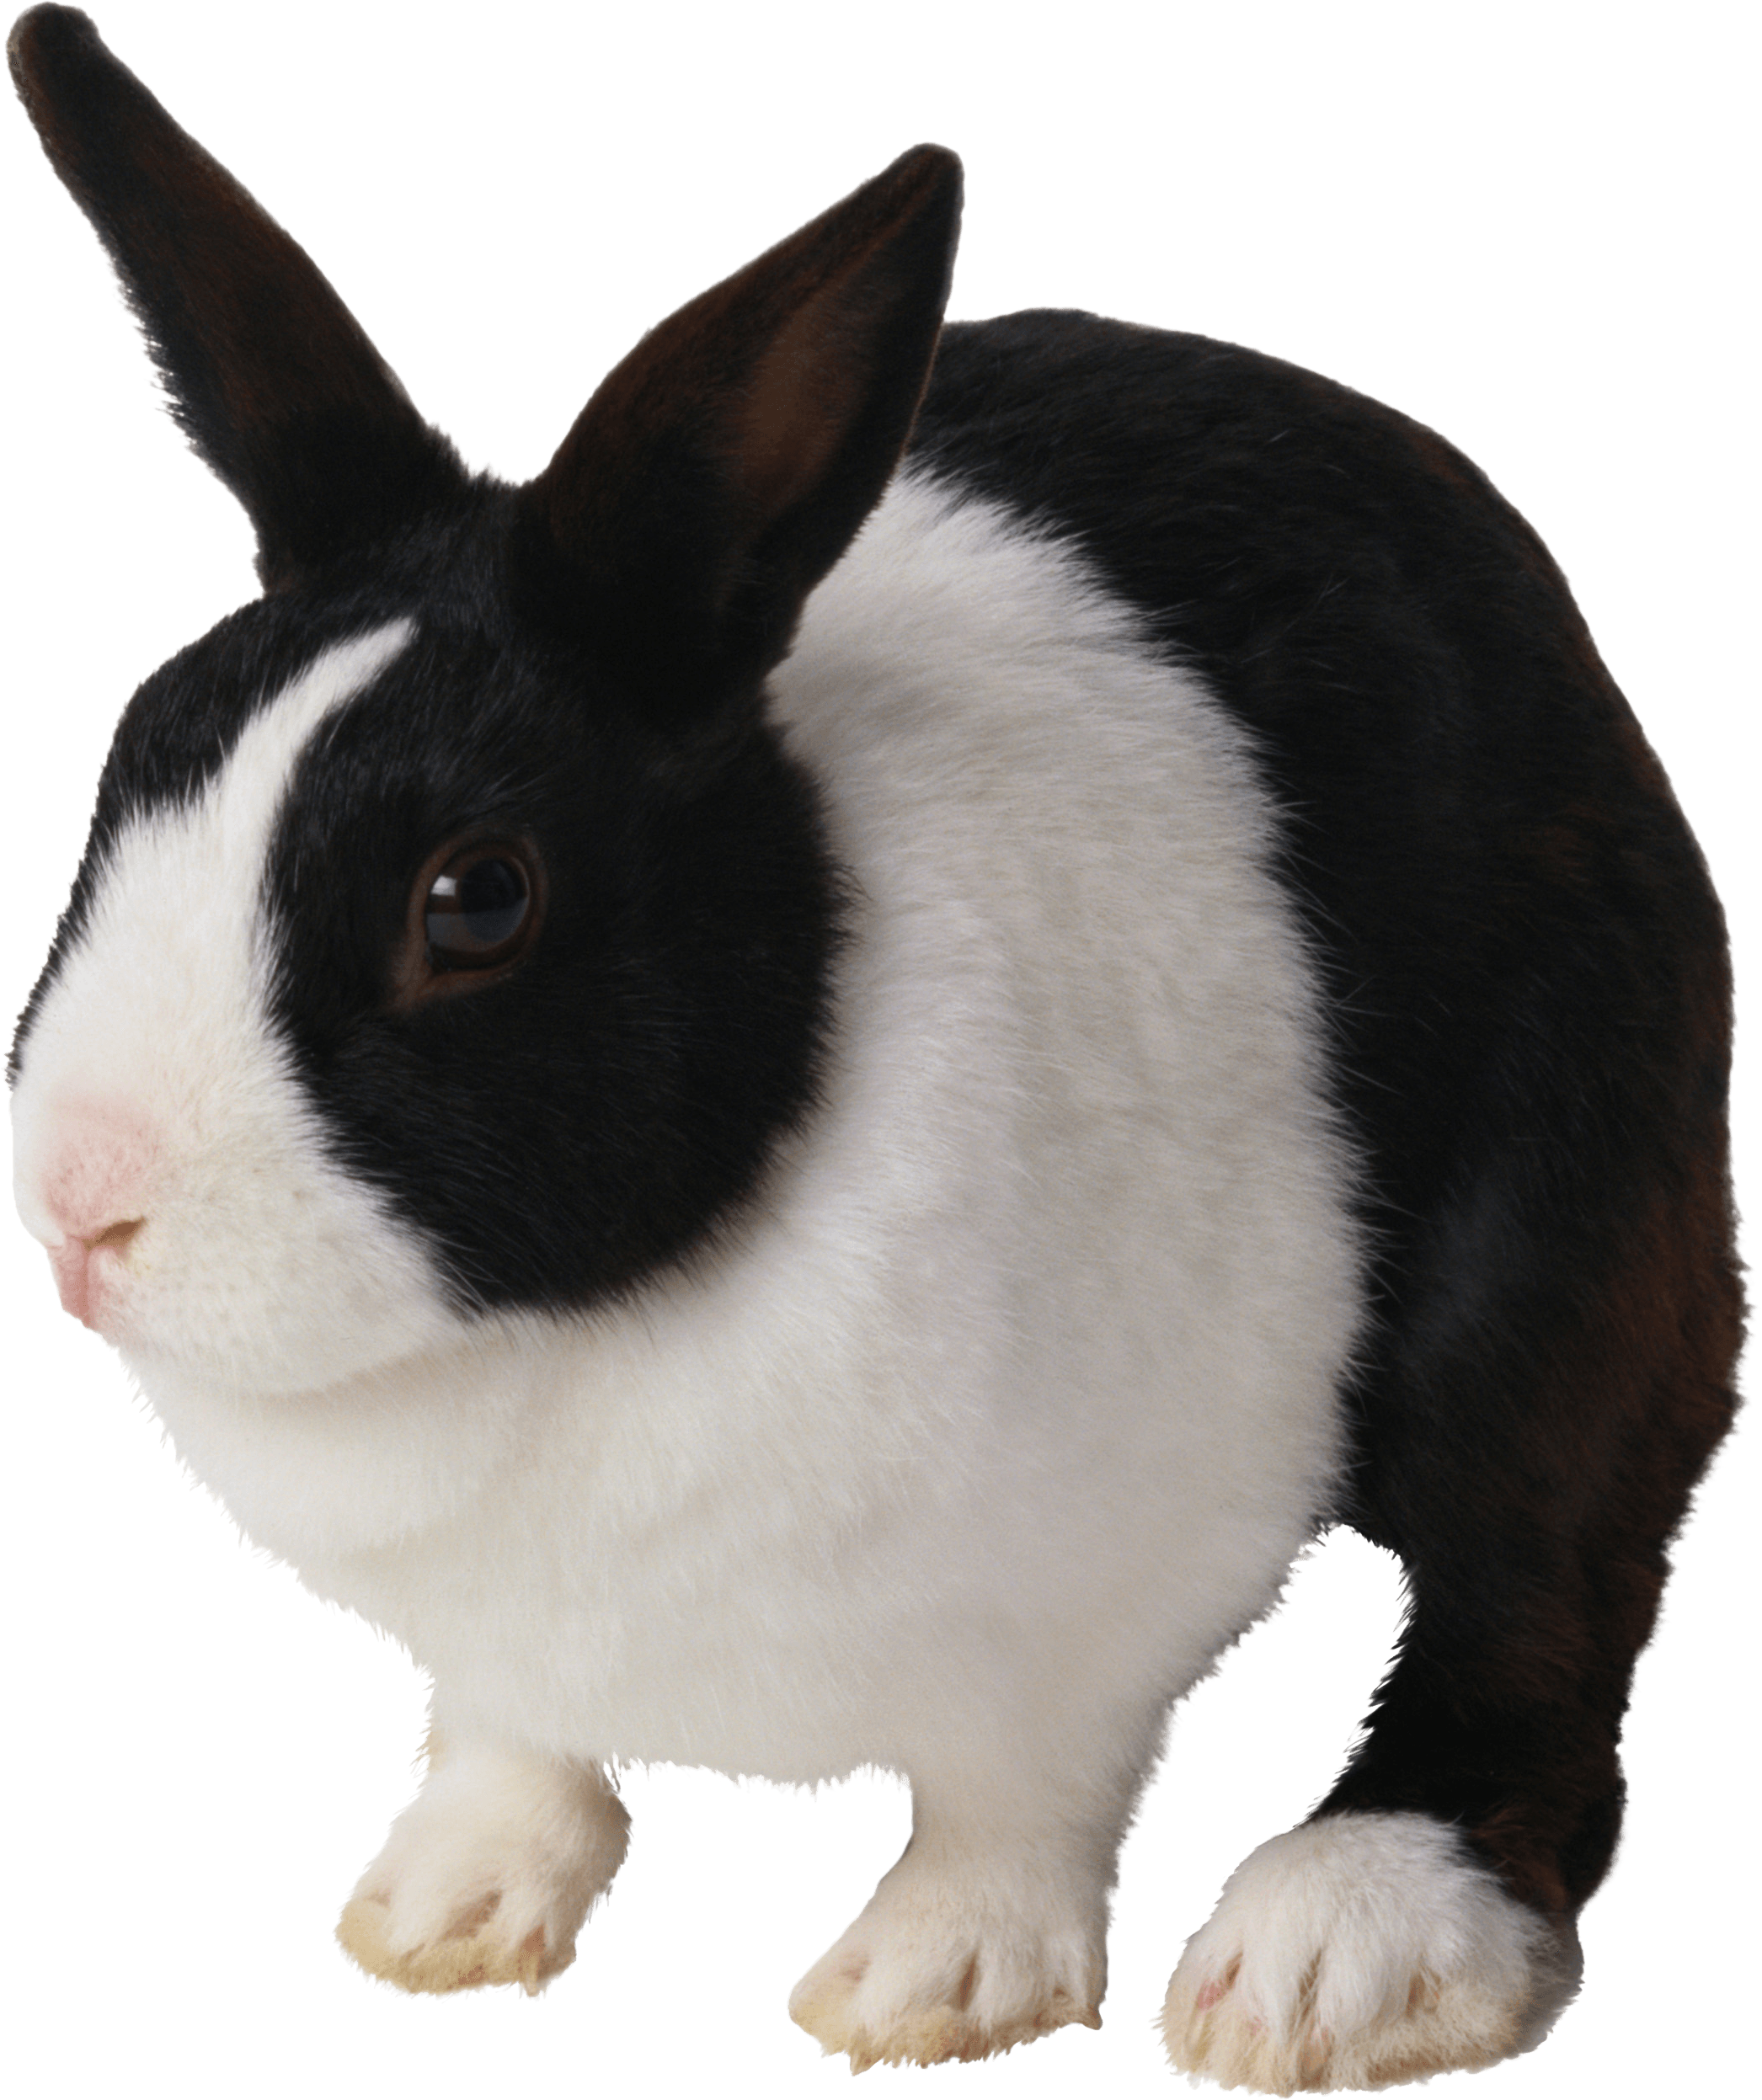 A Black And White Rabbit